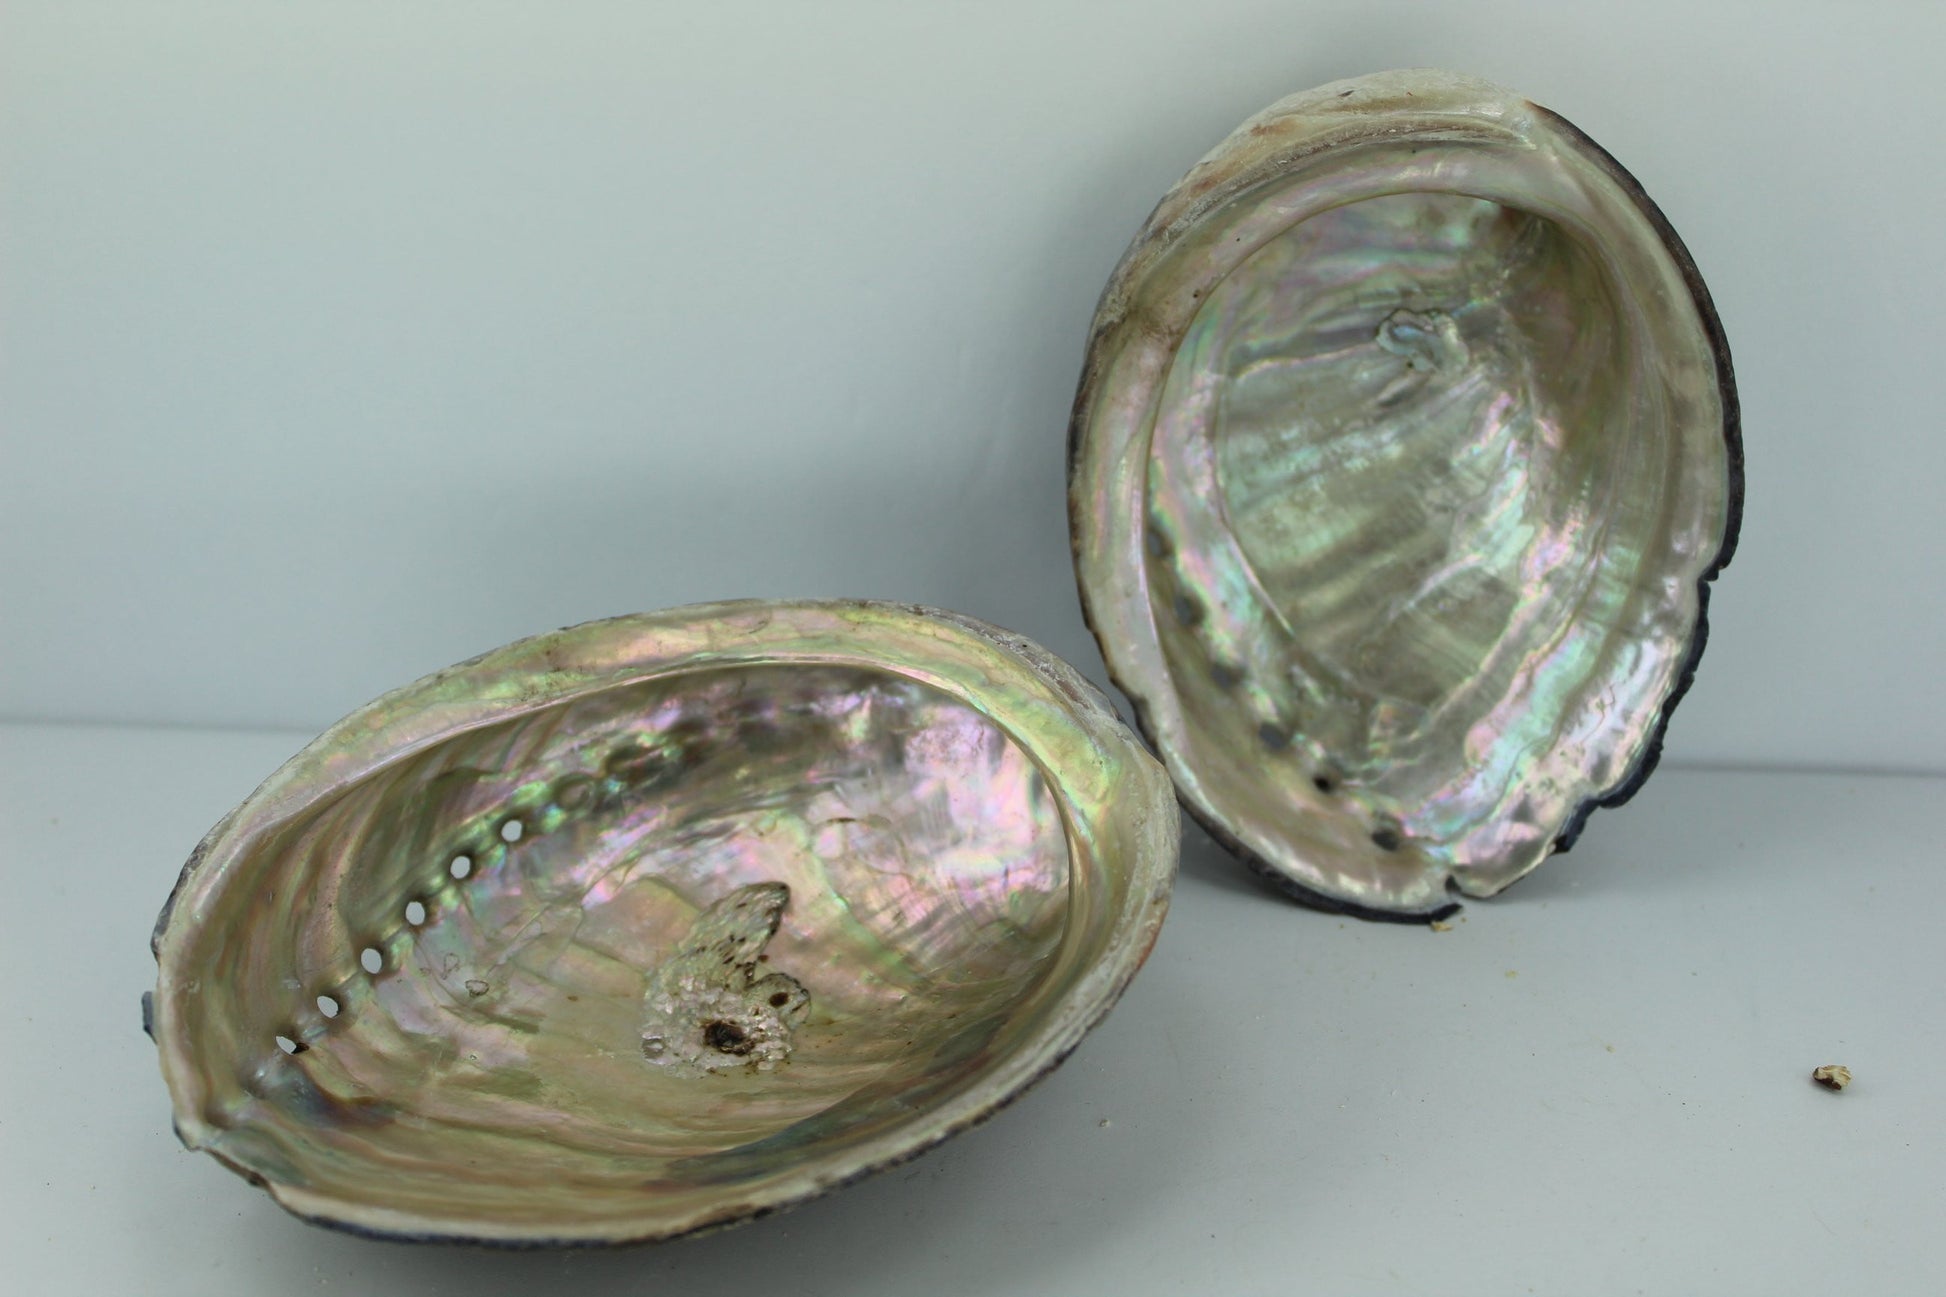 Black Abalone Shells 2 Vintage Rainbow Iridescent  5 1/4"  5" Estate Collection Shell Art Collectibles